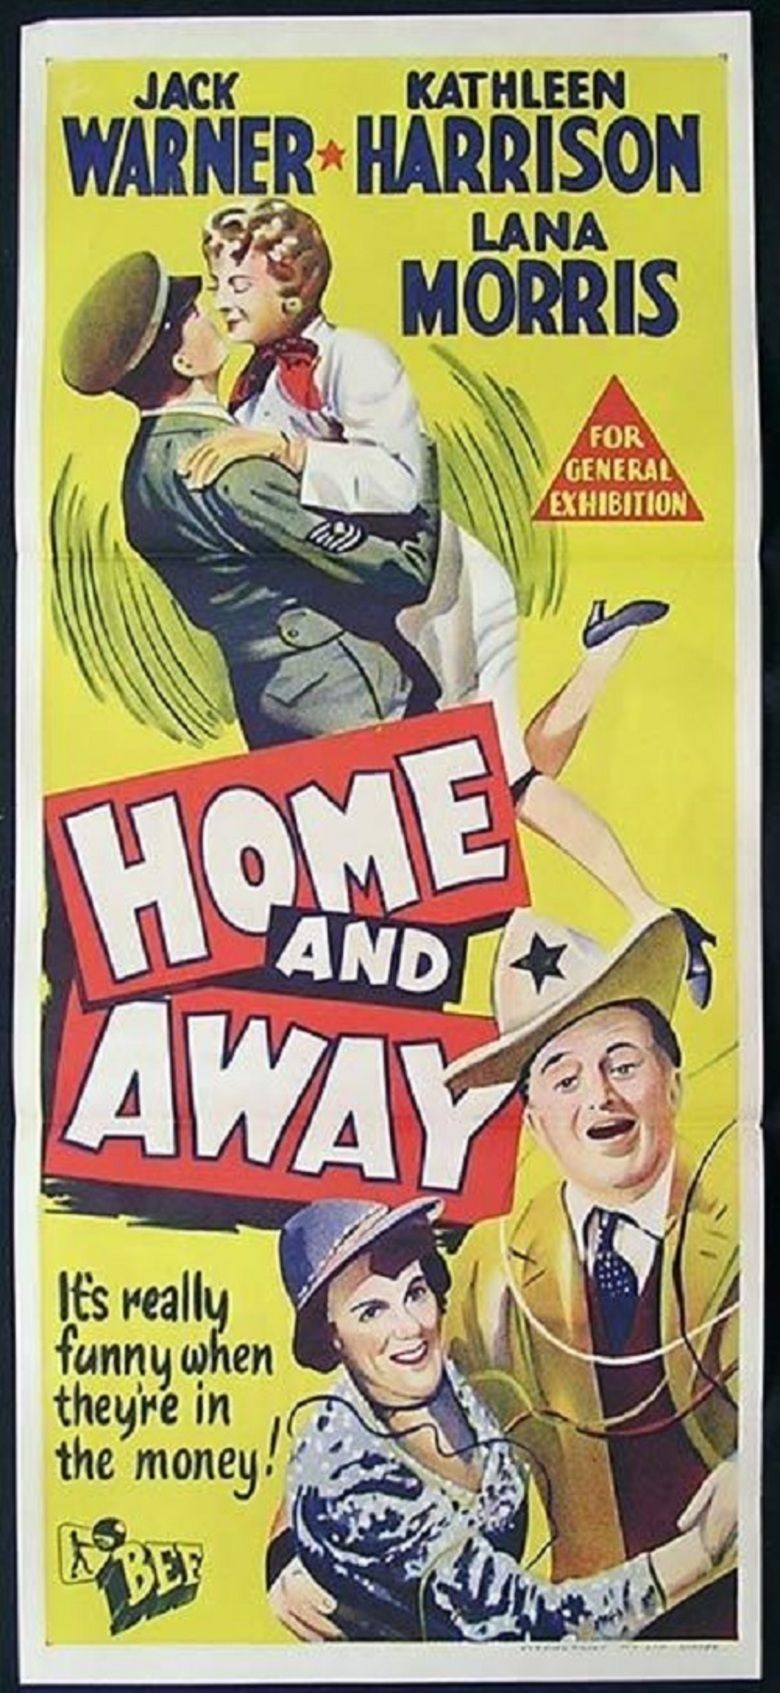 Home and Away (1956 film) movie poster